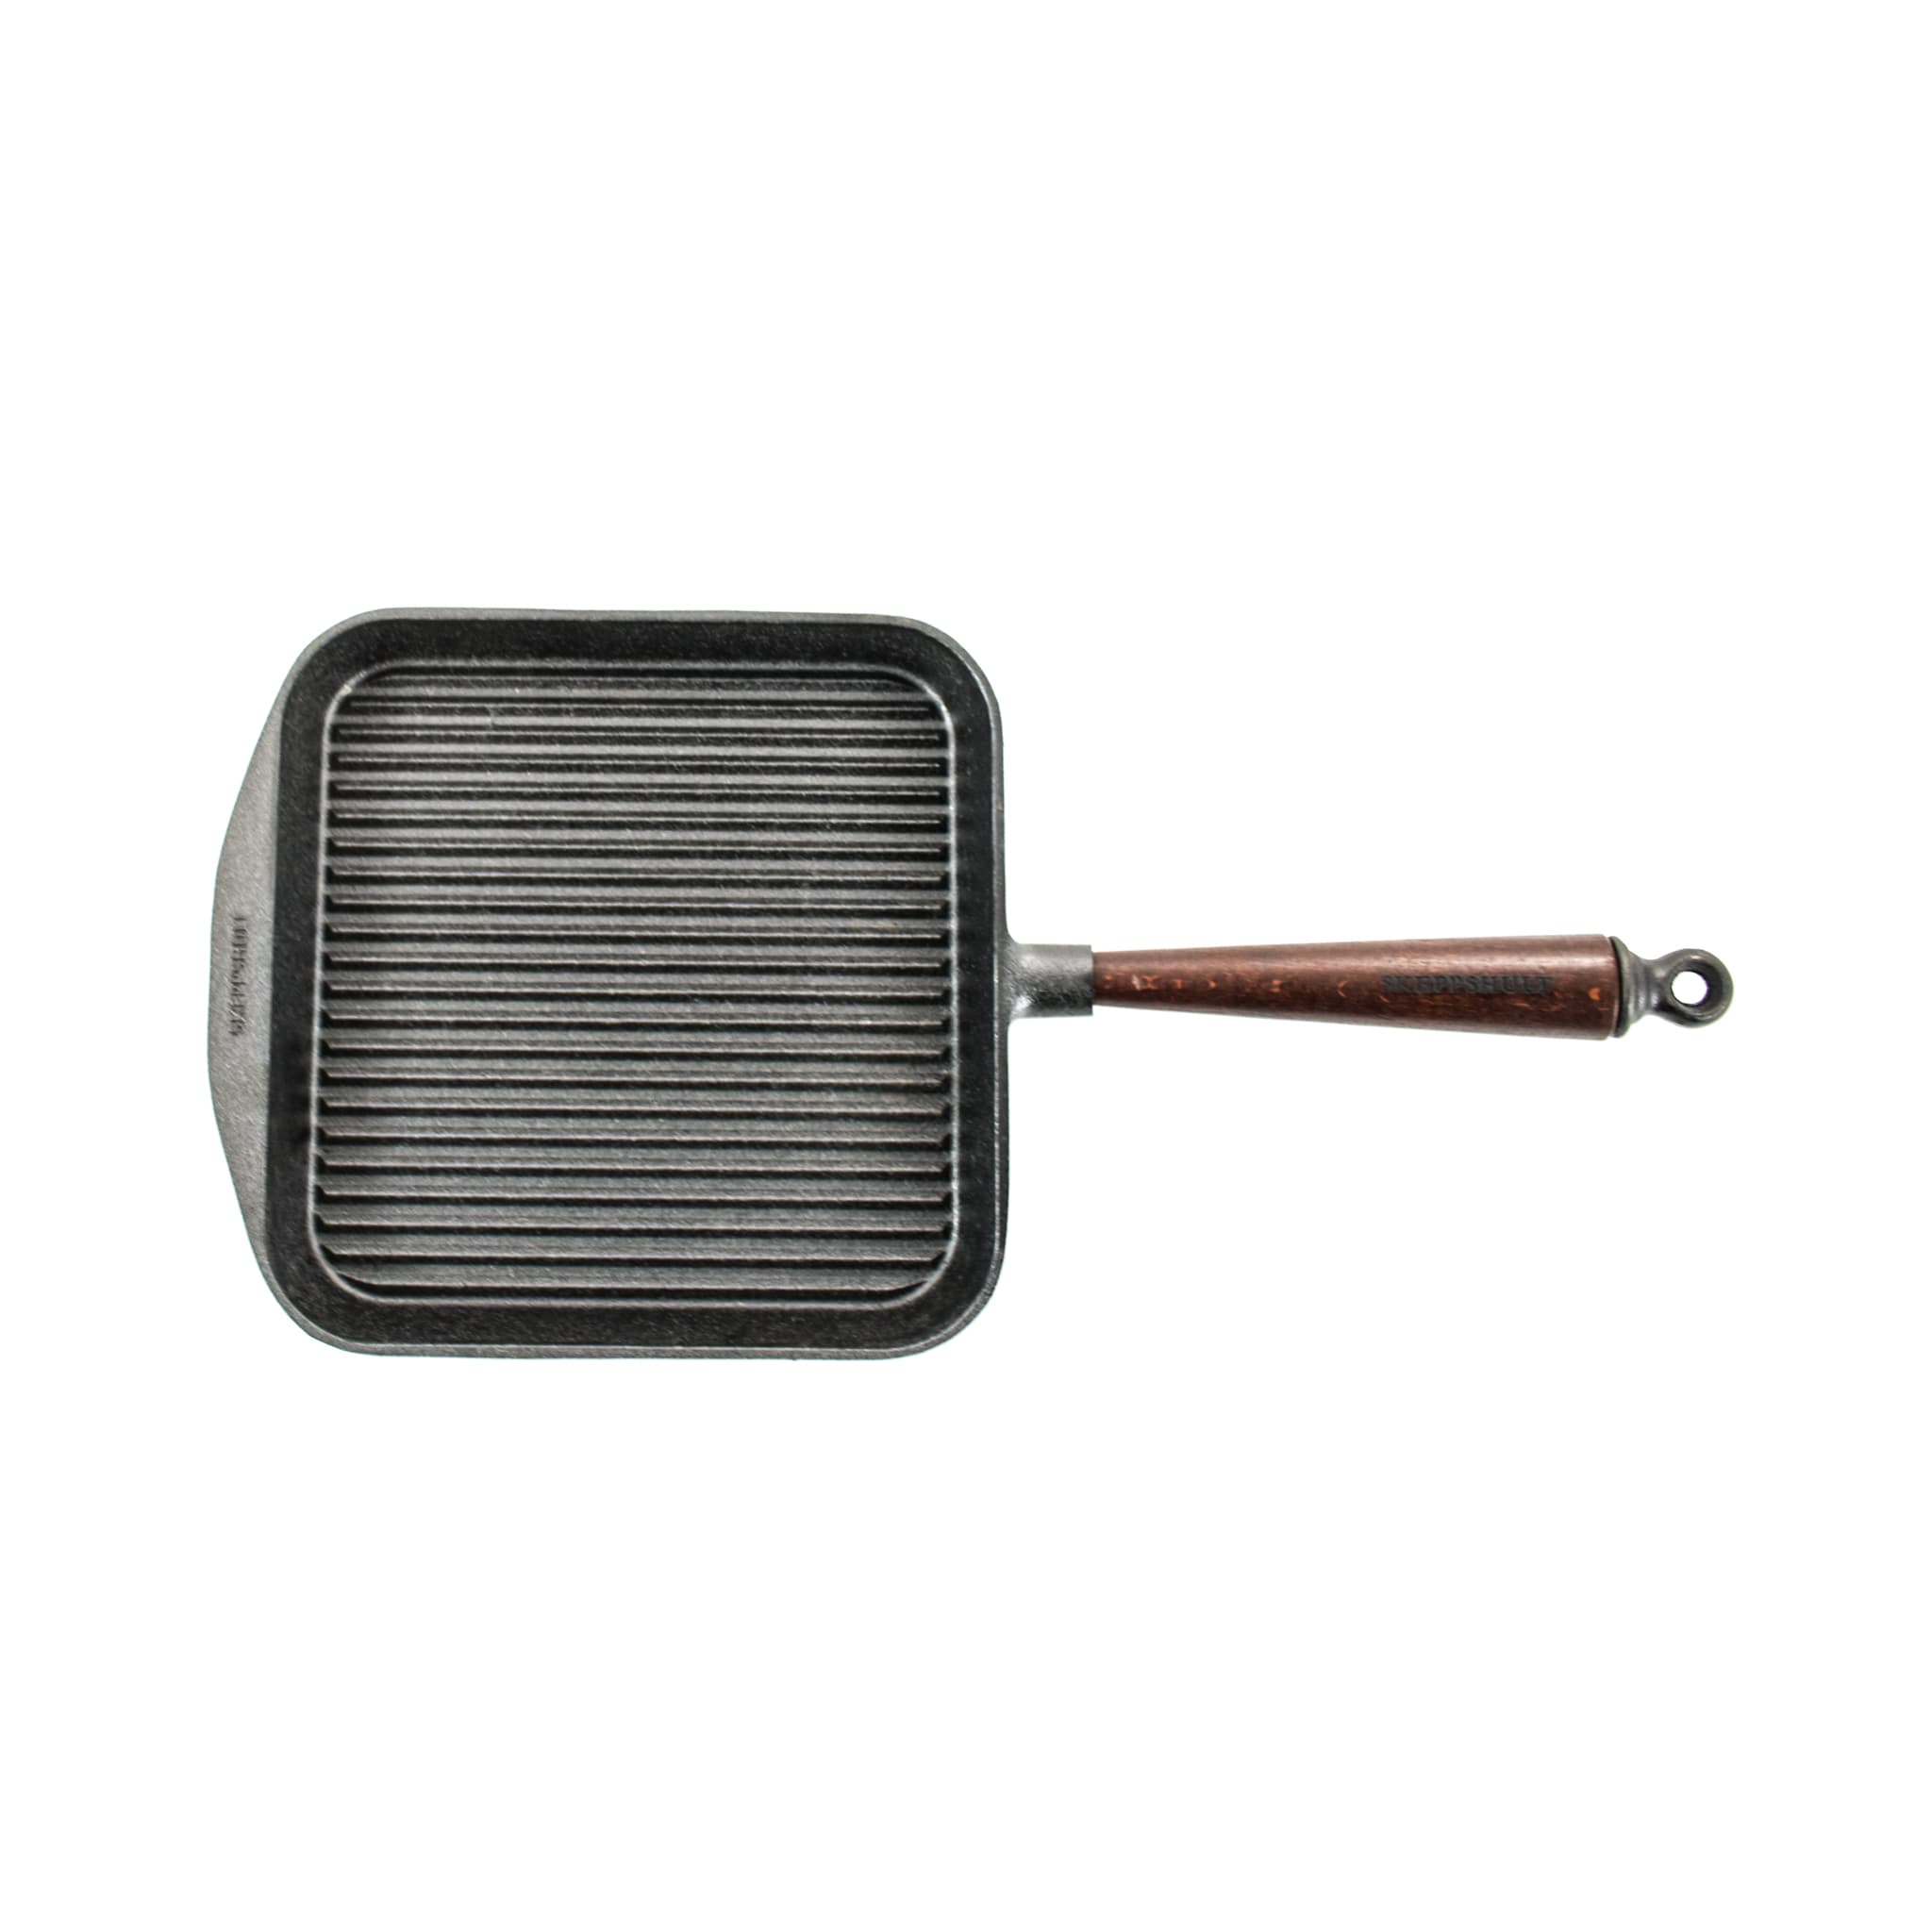 Skeppshult Traditional Cast Iron Square Grill Pan, 25cm